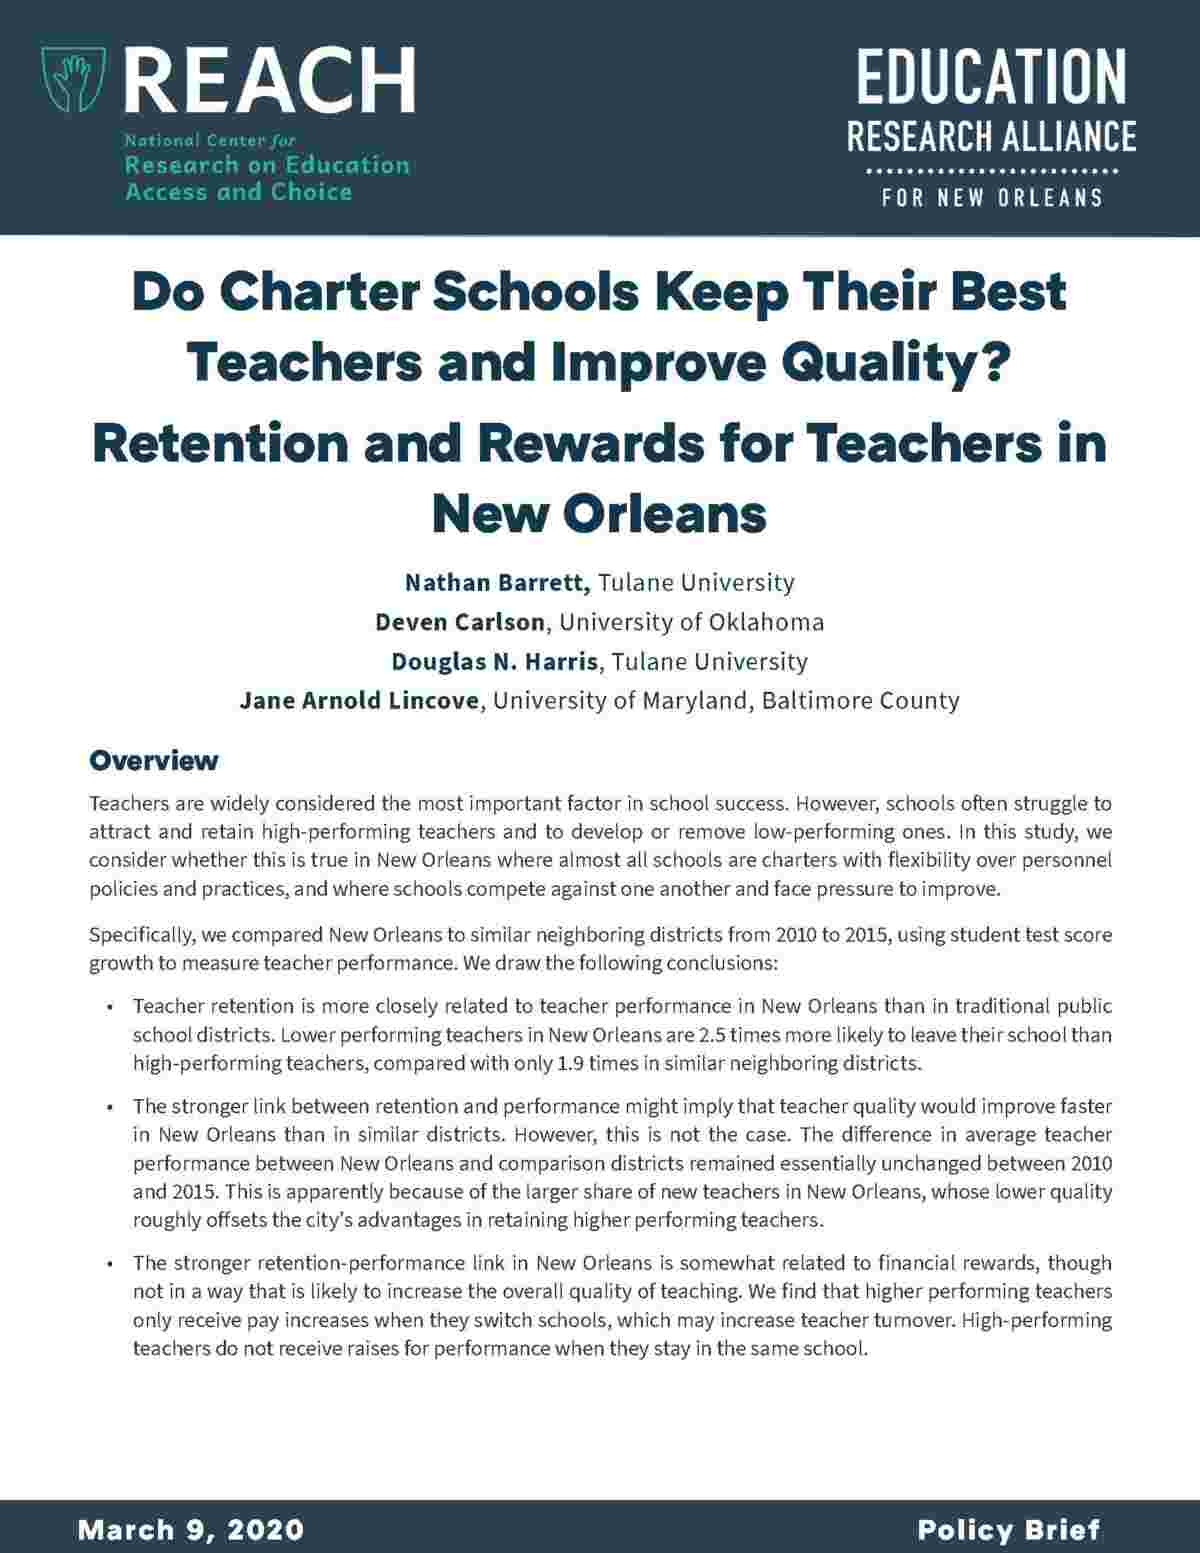 Cover of the REACH policy brief on retention and rewards for teachers in New Orleans